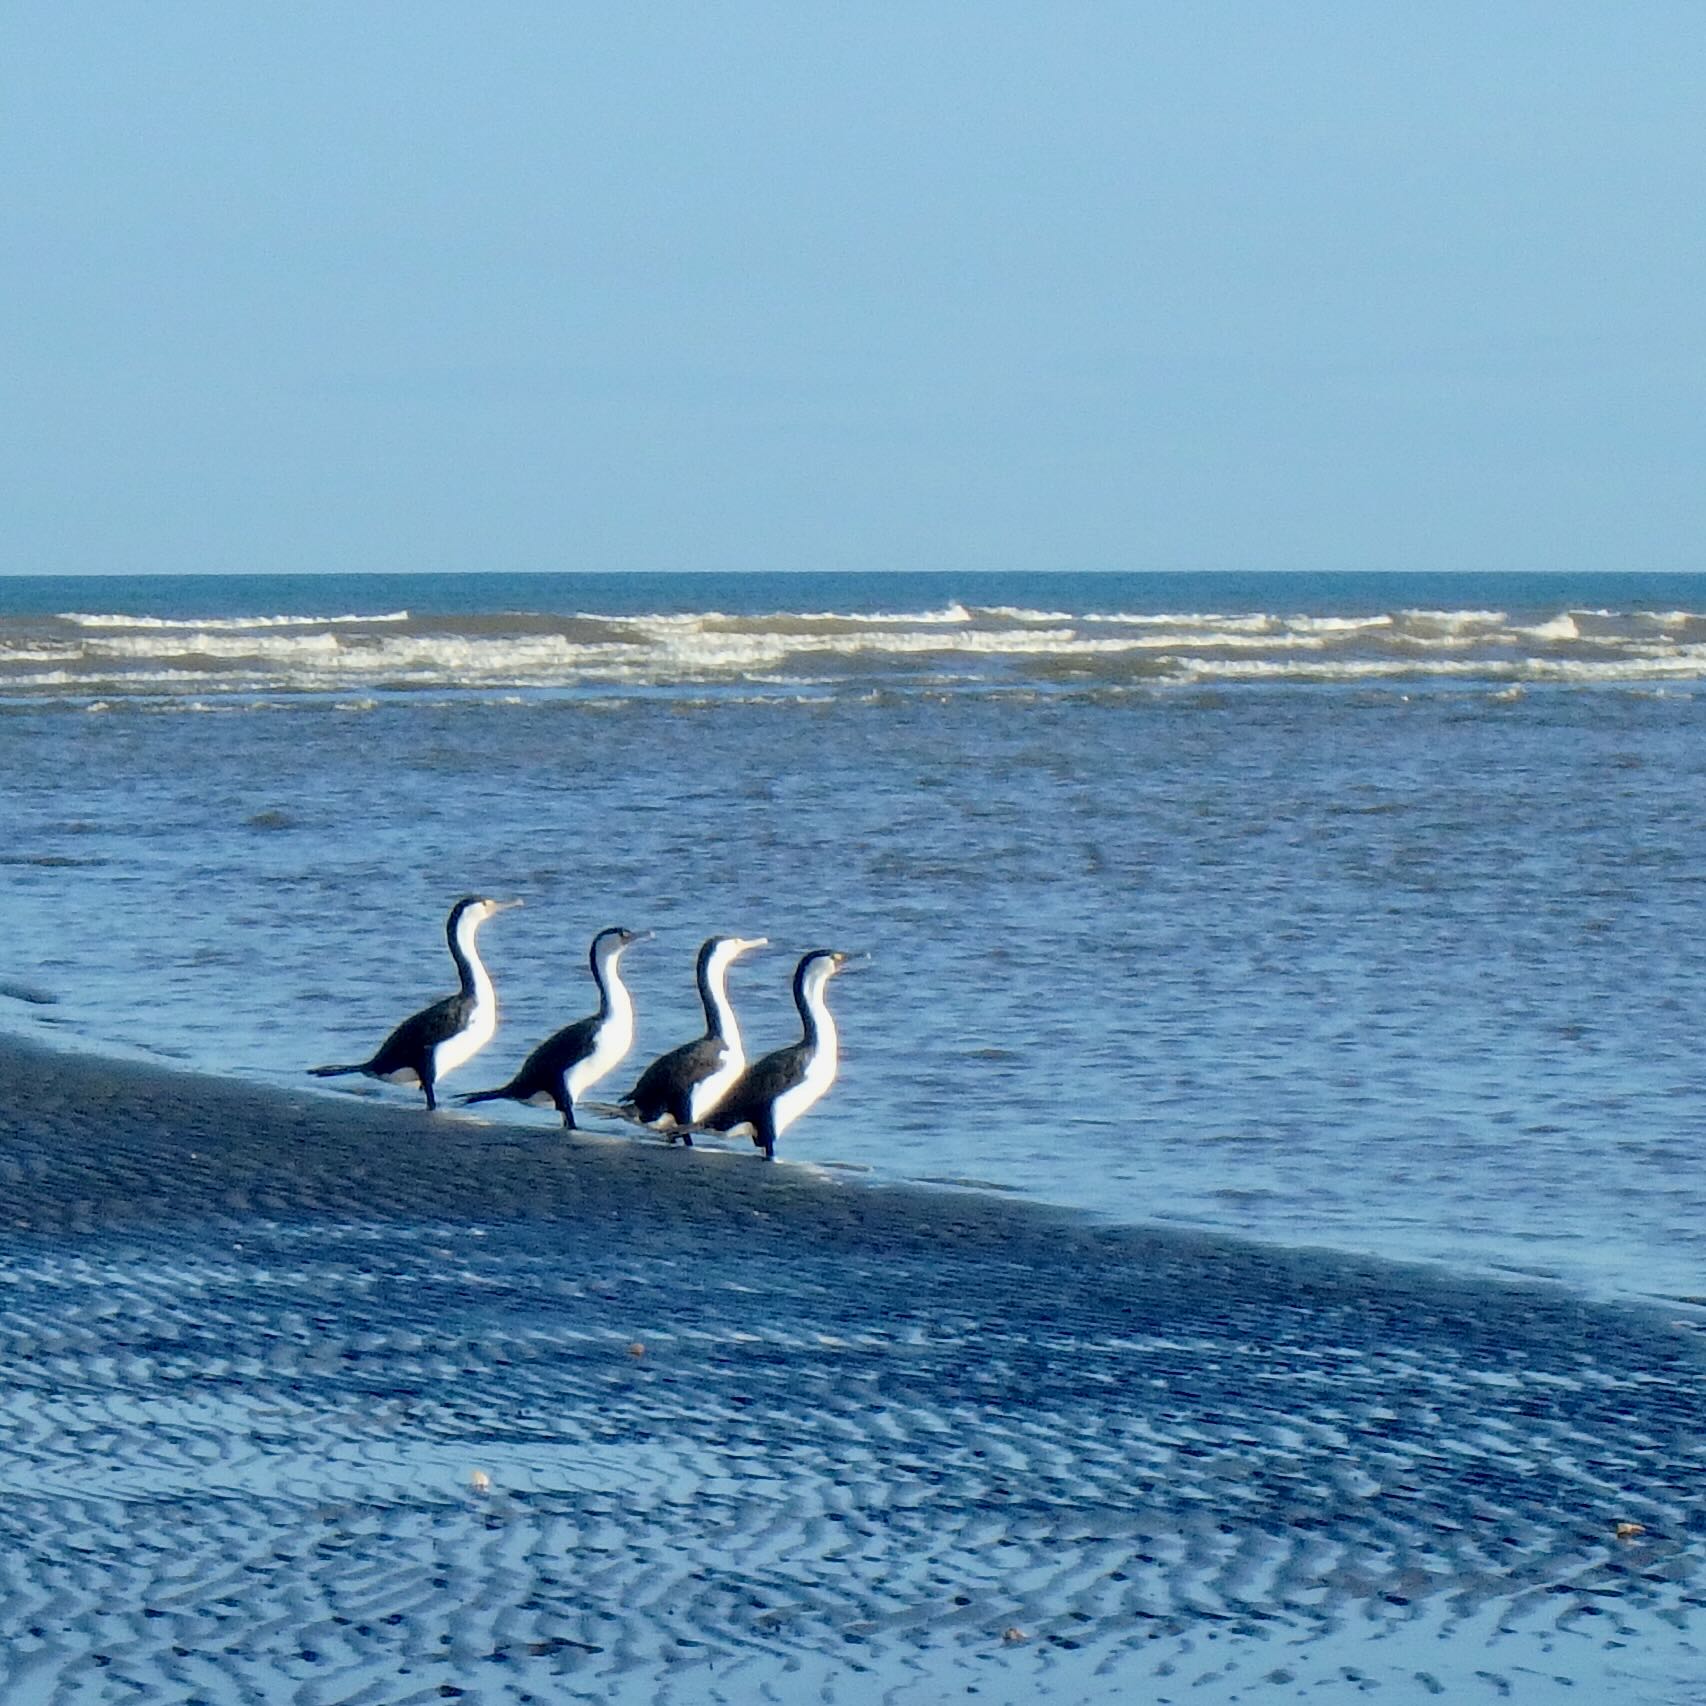 Four large black and white birds standing in shallow sea water. 